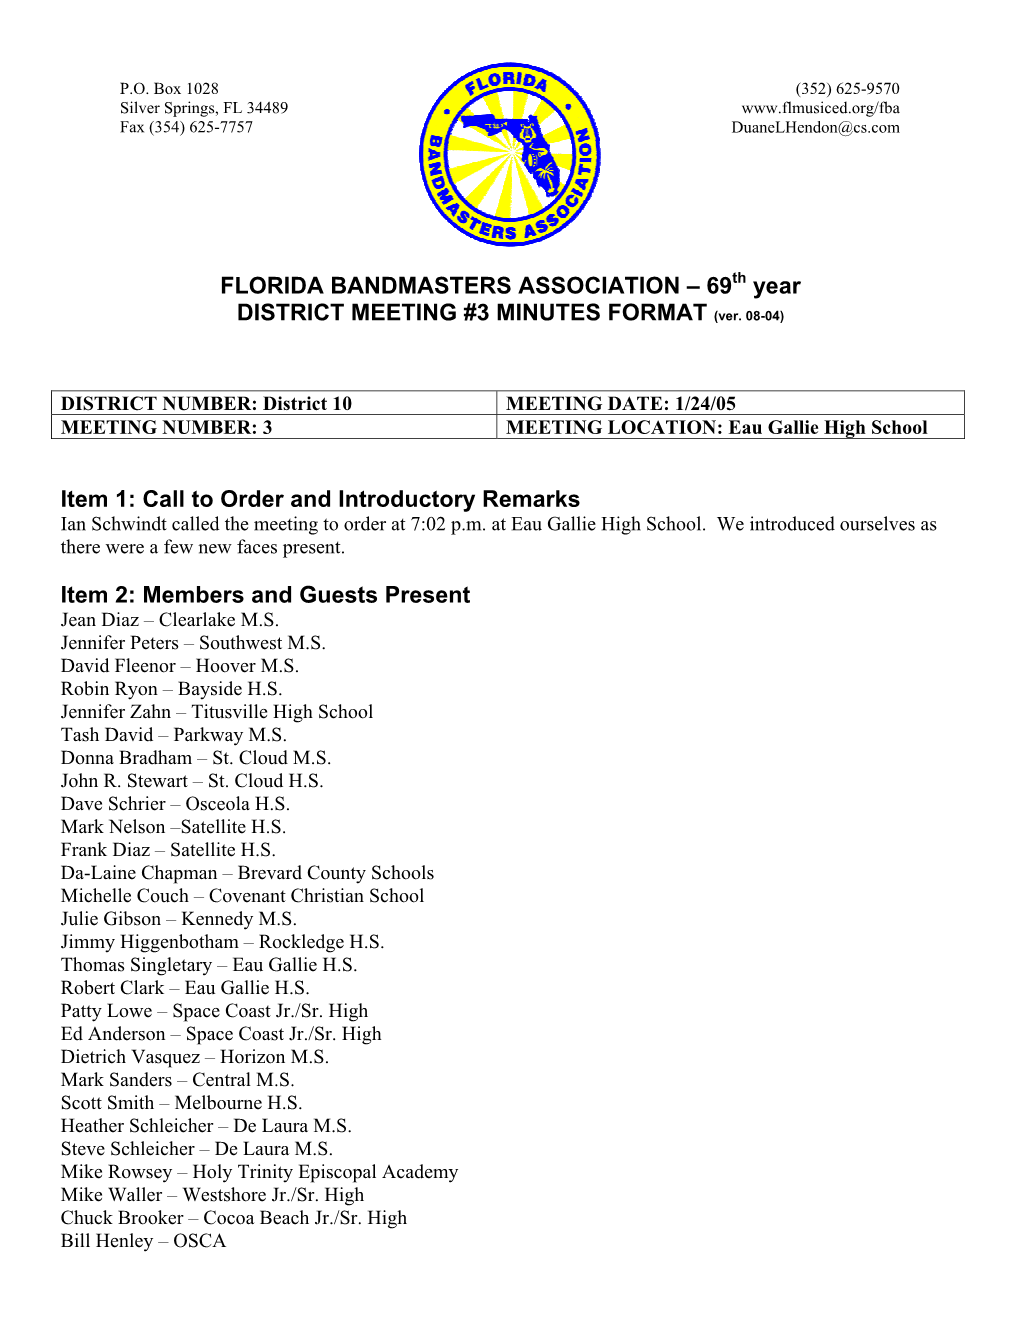 FLORIDA BANDMASTERS ASSOCIATION – 69Th Year DISTRICT MEETING #3 MINUTES FORMAT (Ver